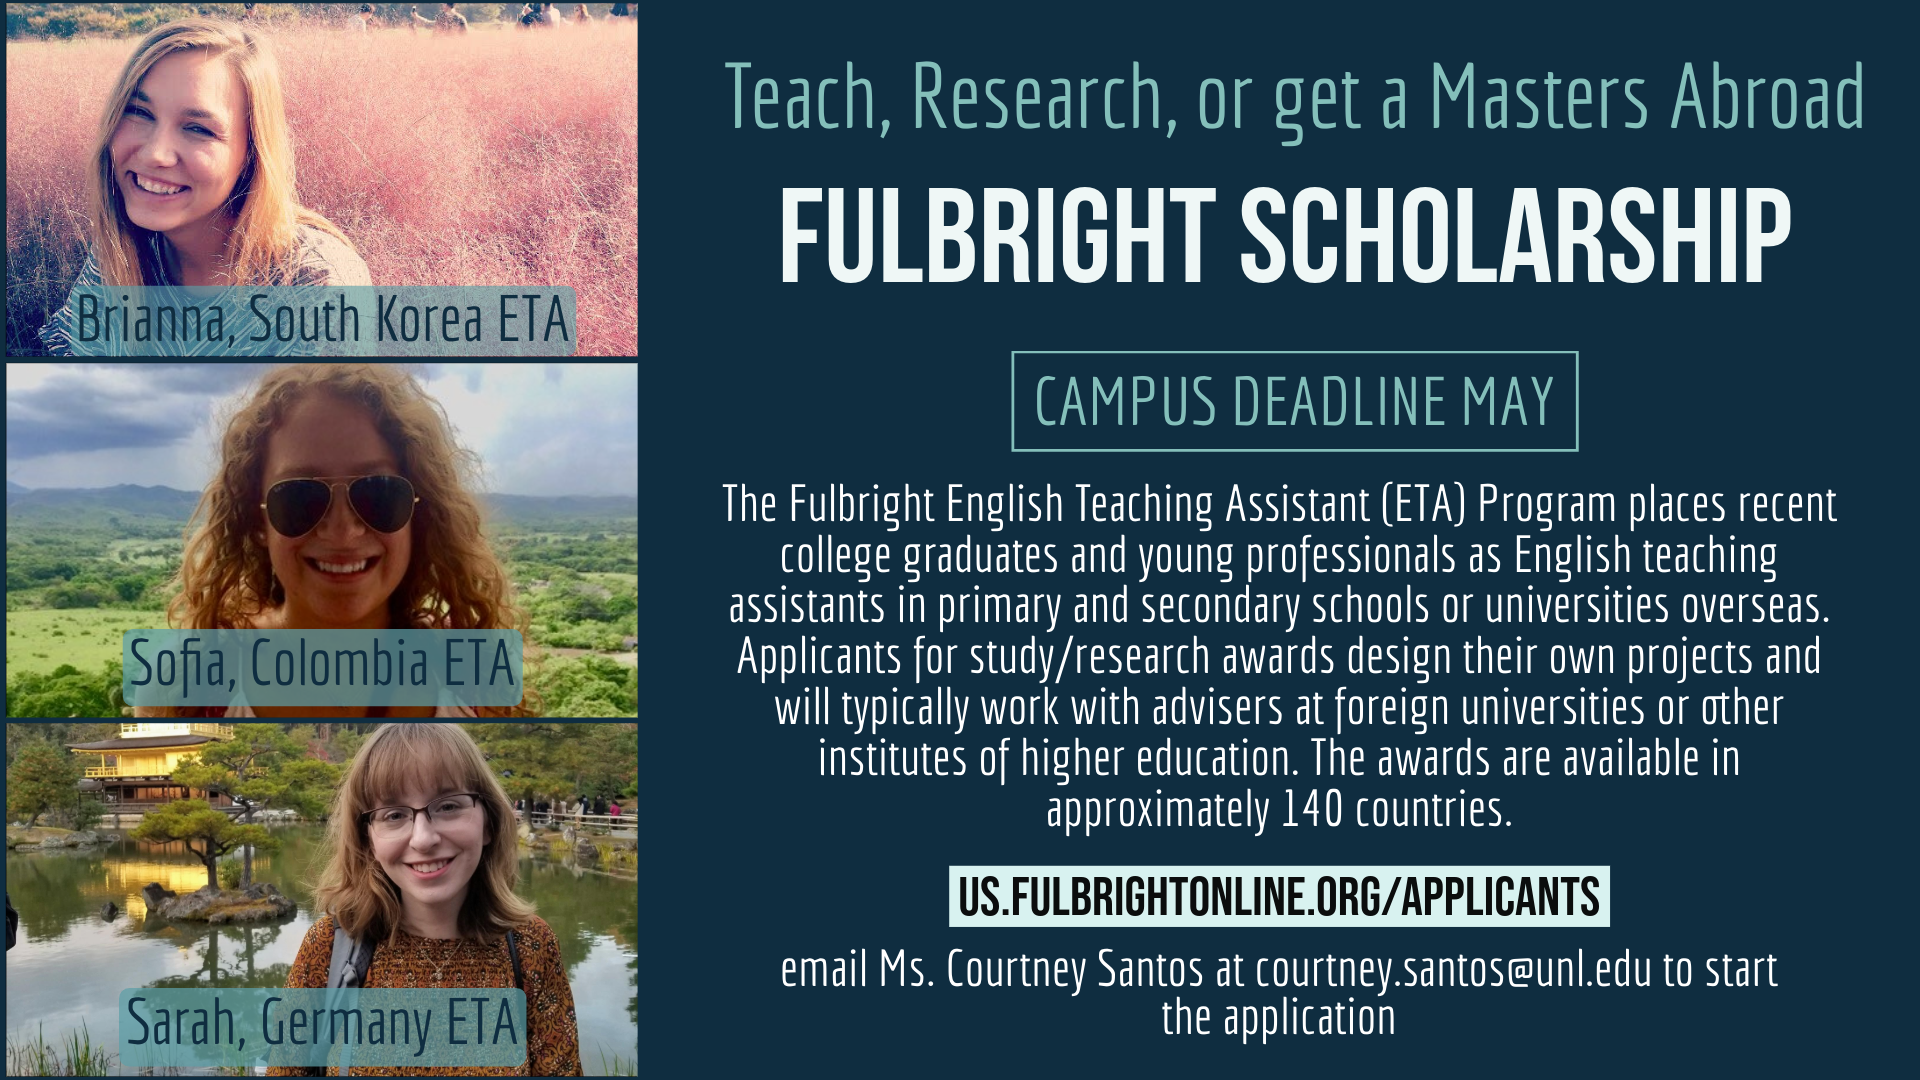 Apply to become a Fulbright Scholar